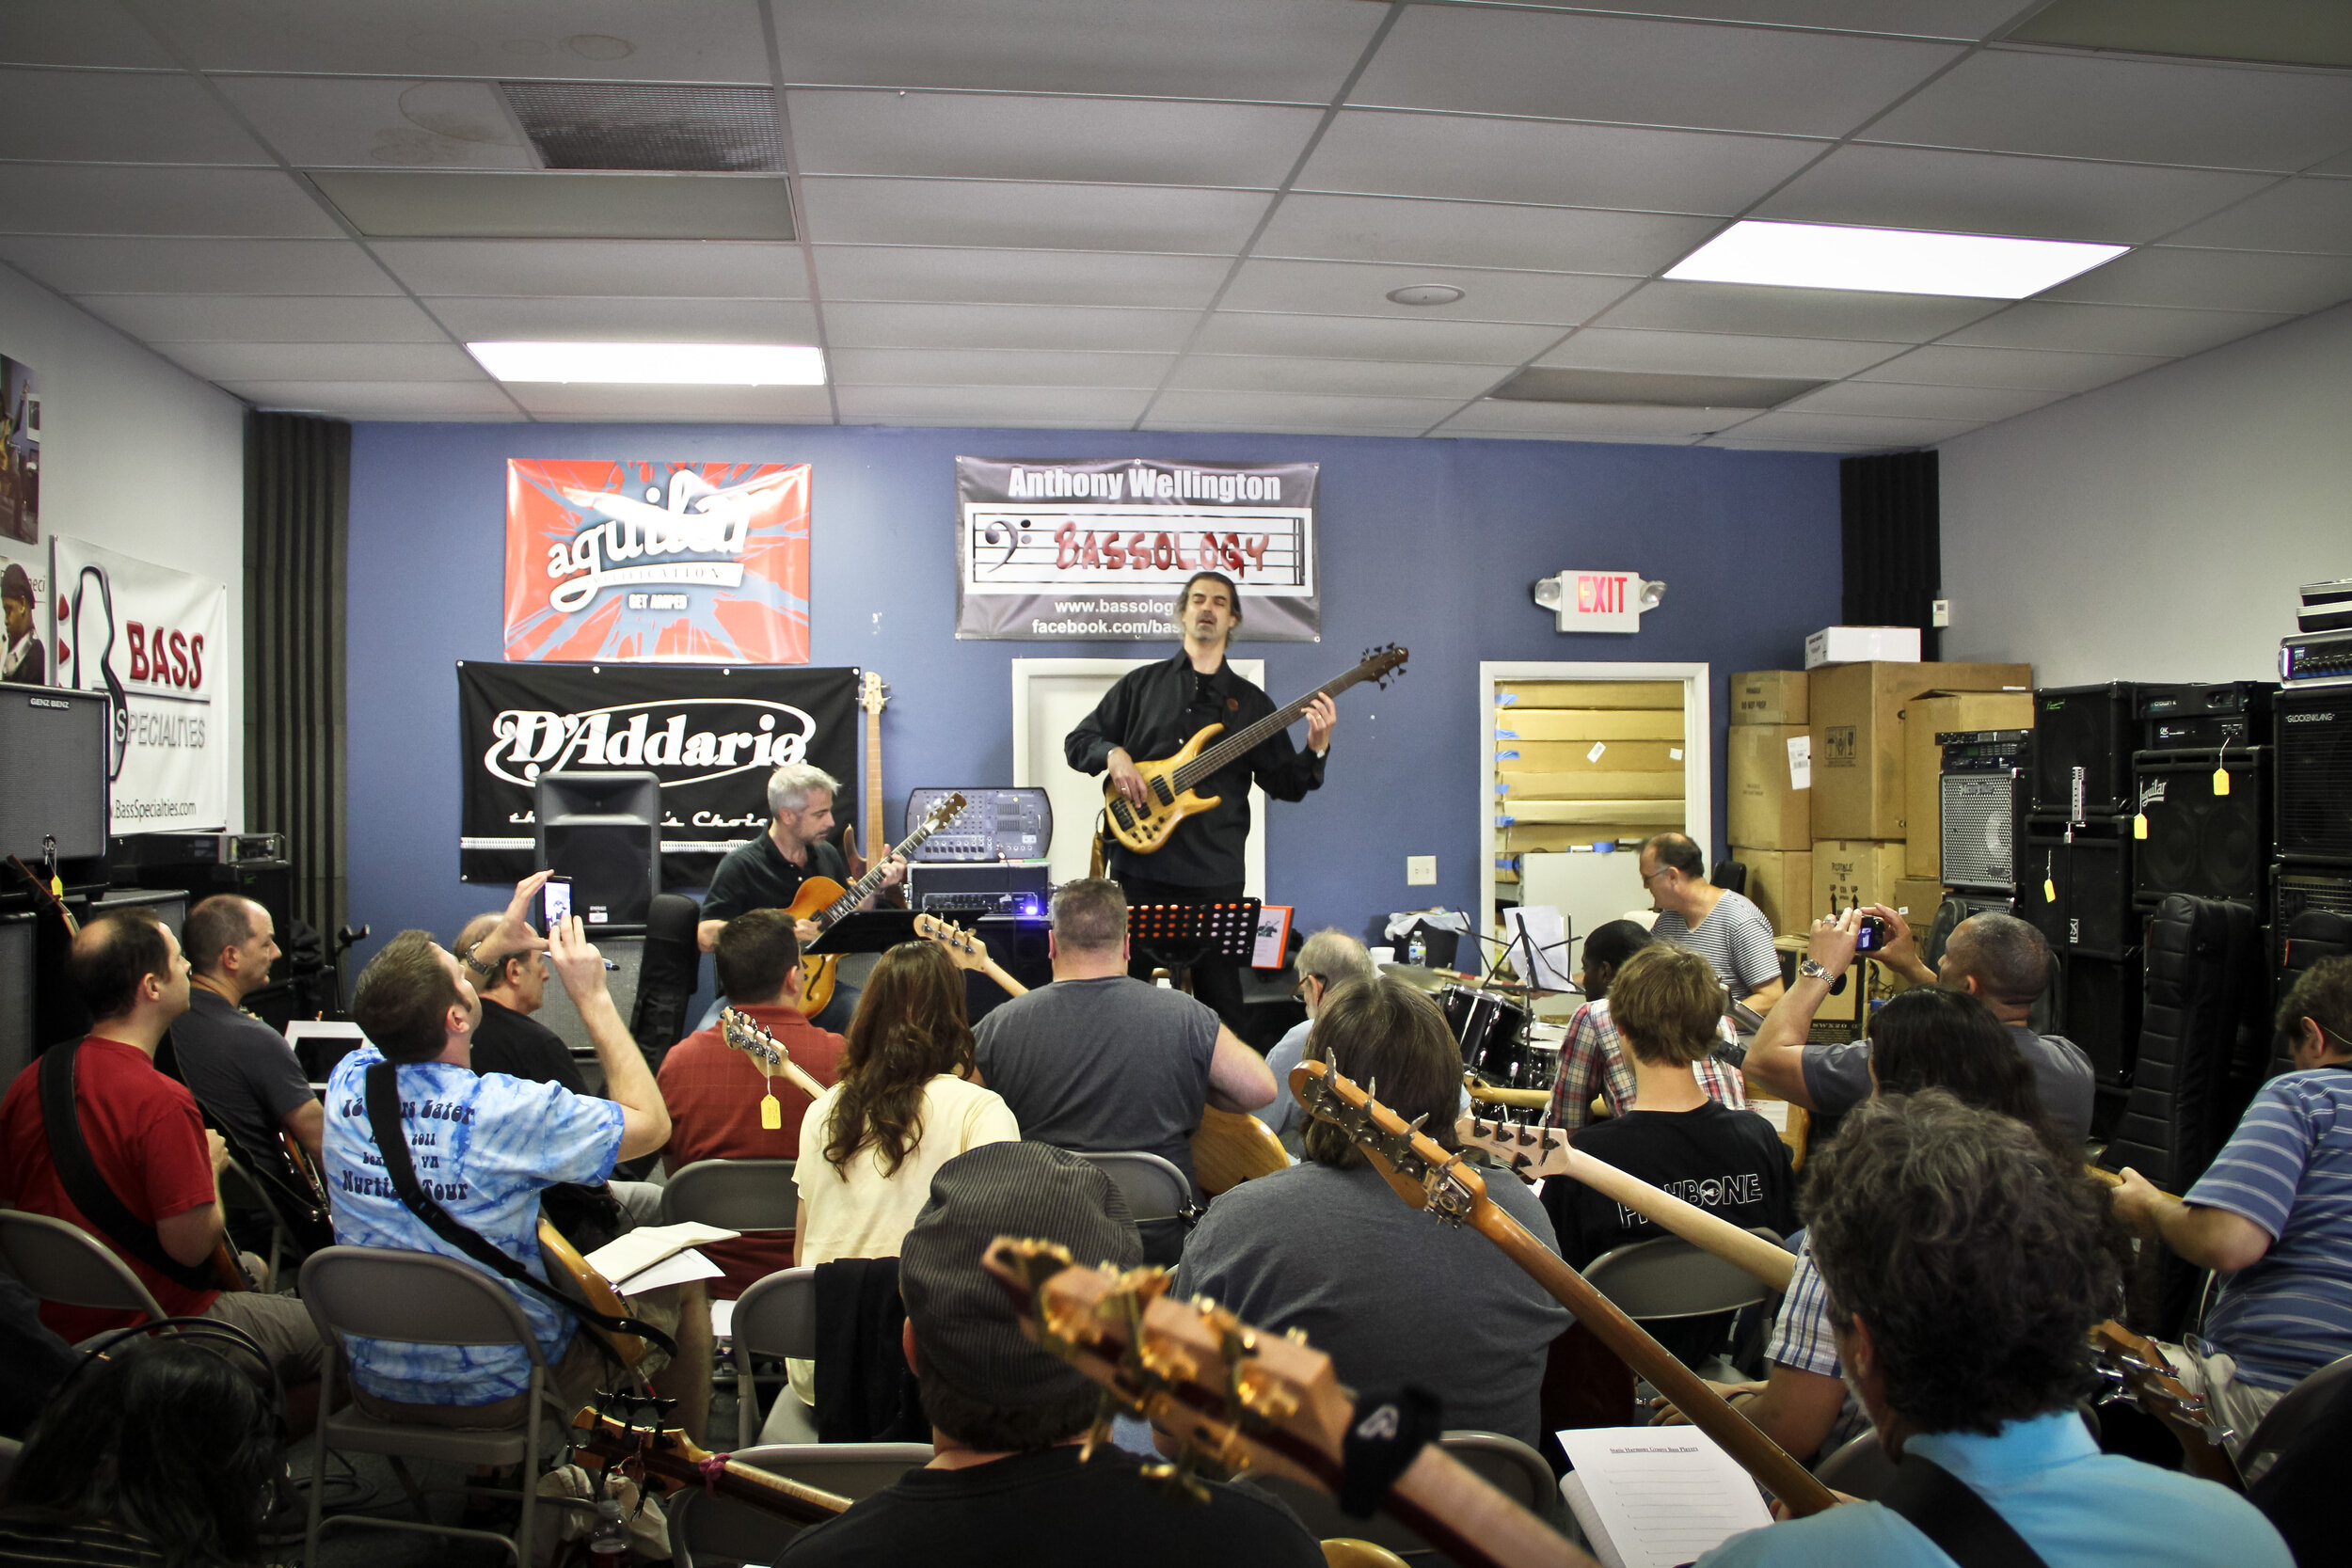 Bass Immersion Day clinic on “Odd Meter Grooves” at Bass Specialties in 2011